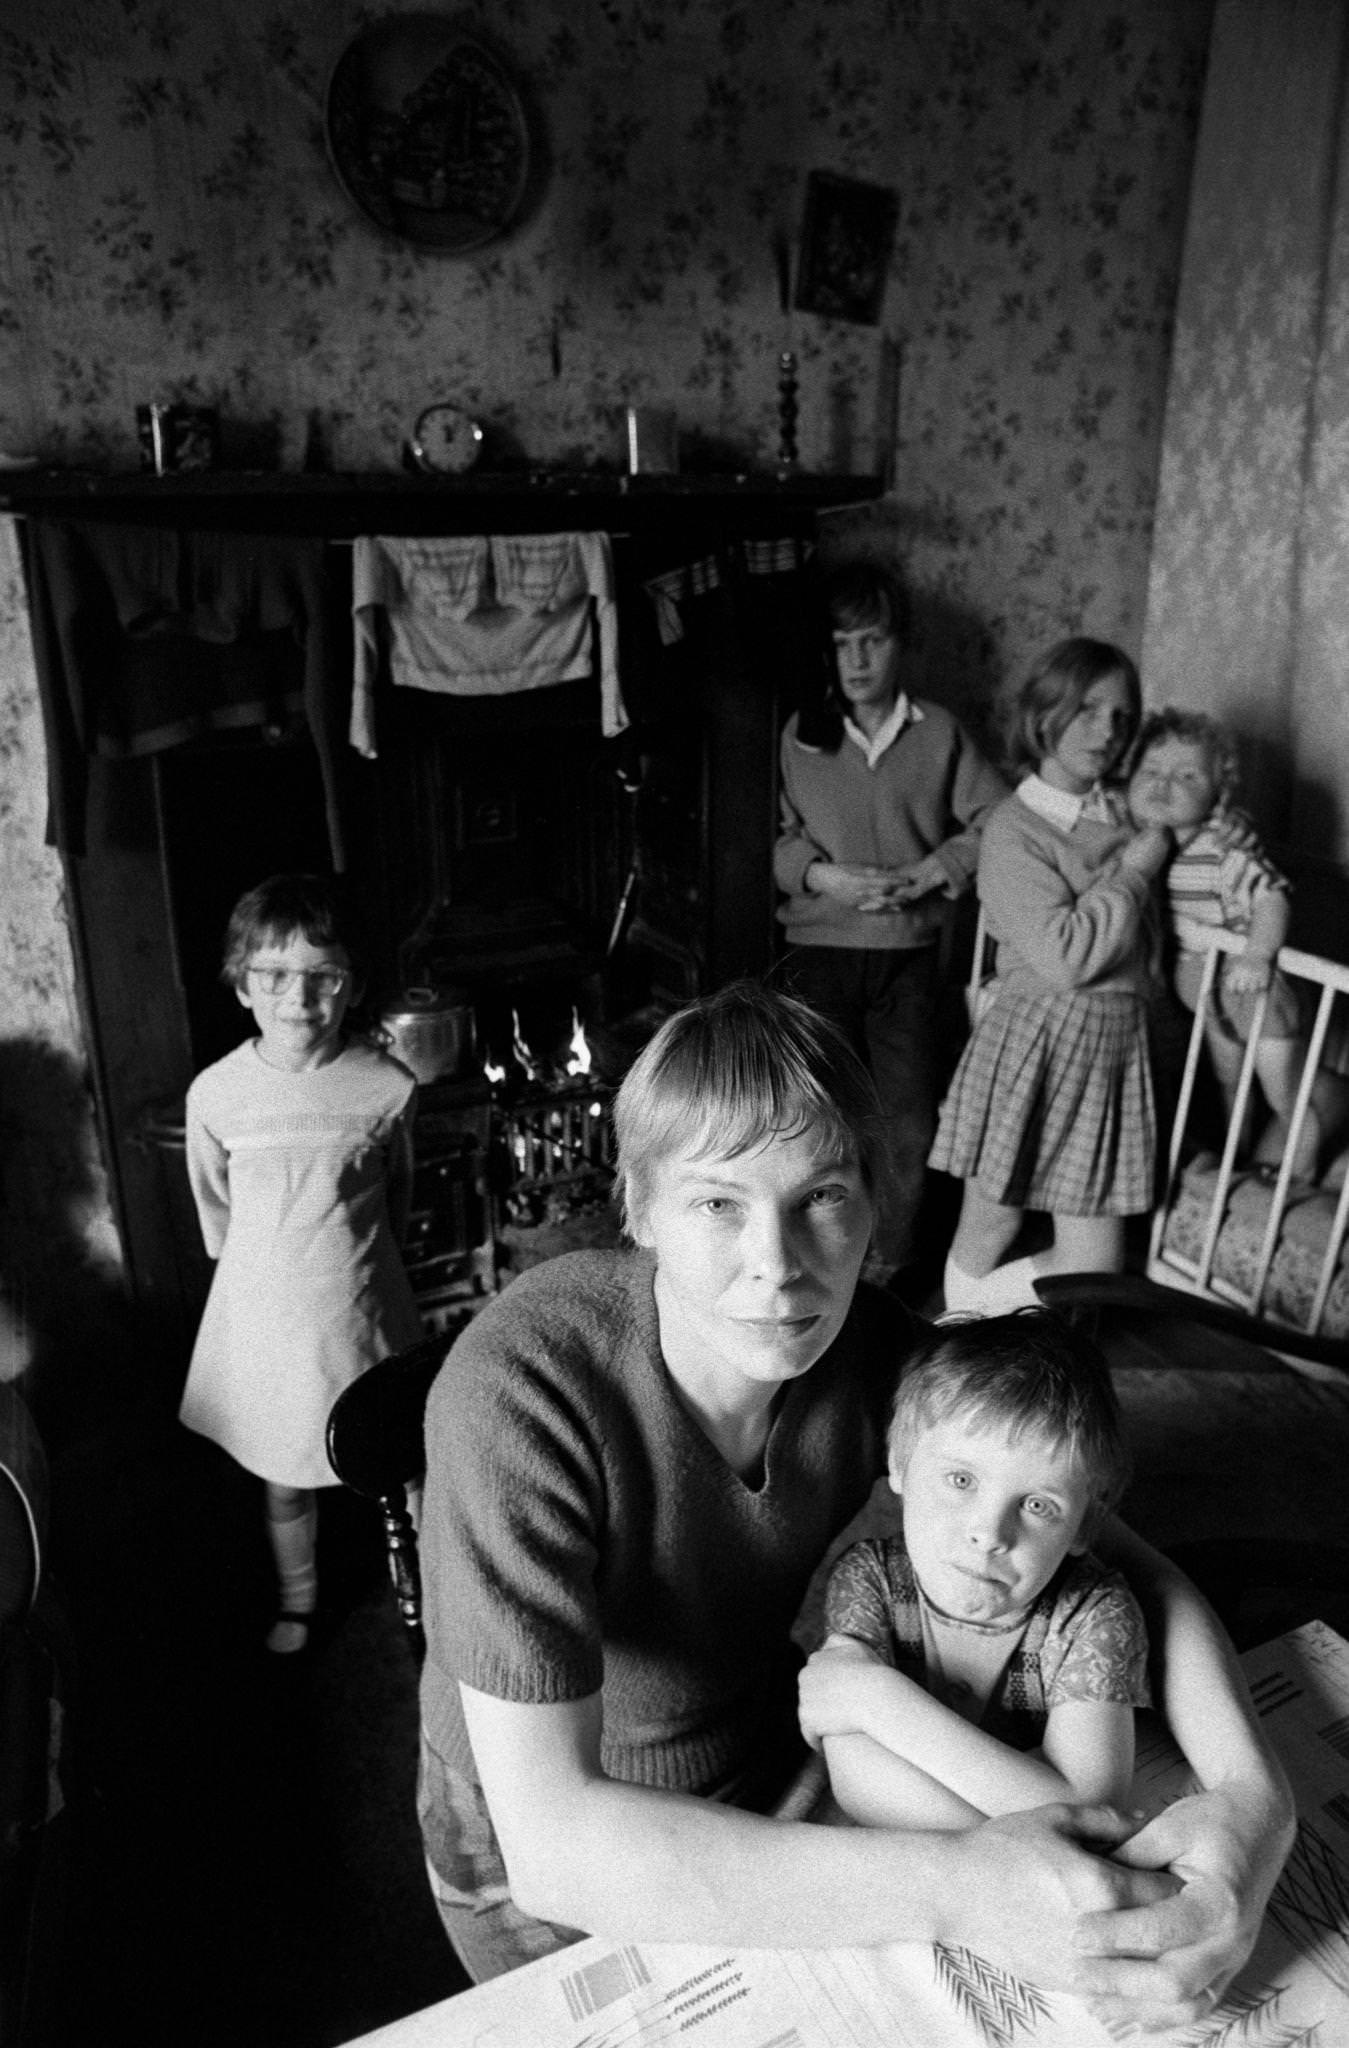 A mother with her five children in poor housing in the notorious Gorbals district of Glasgow, 1969.